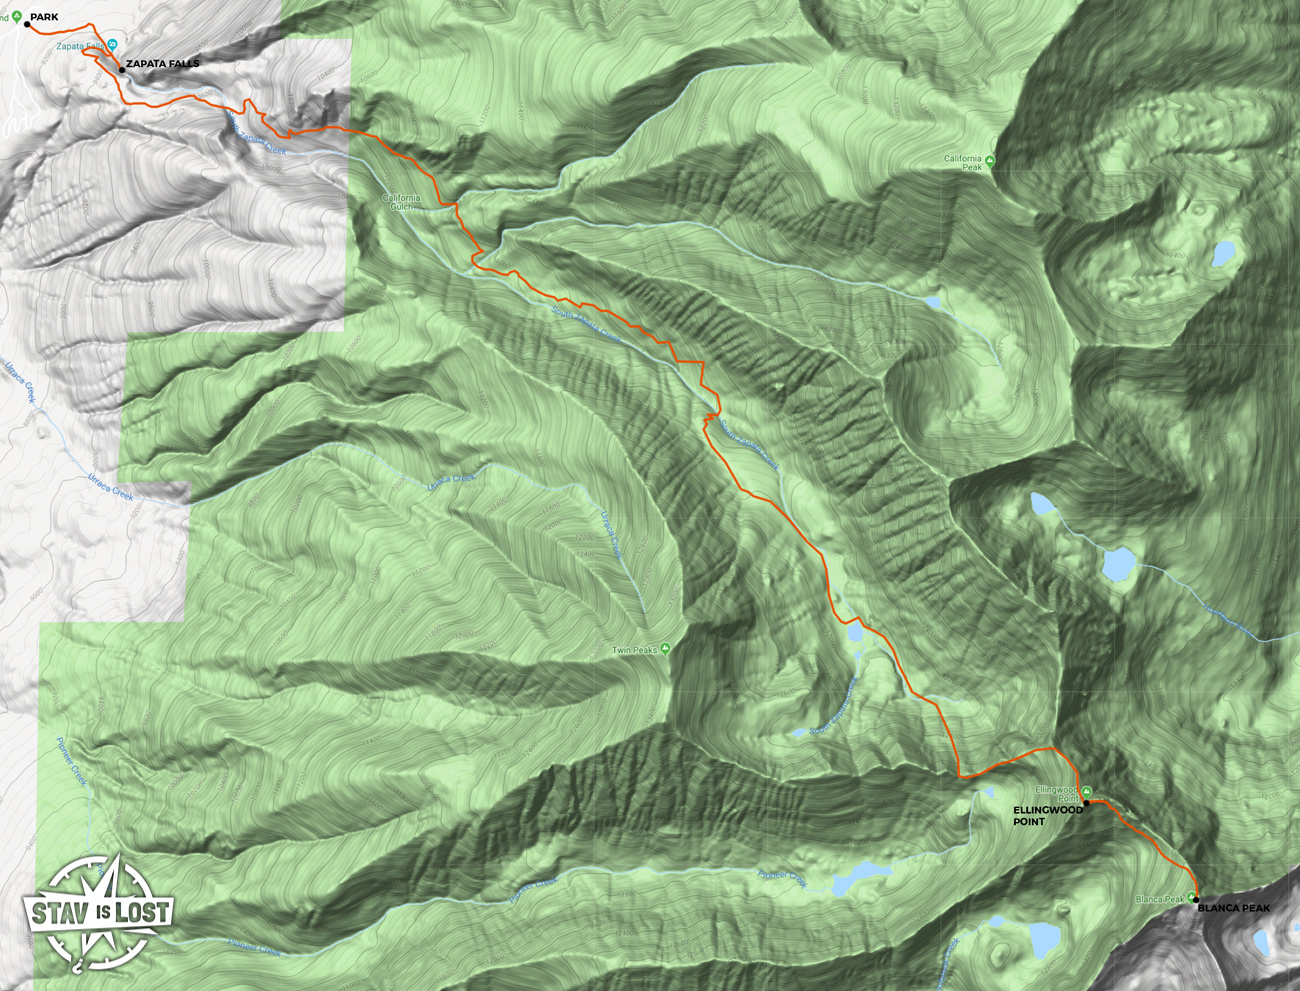 map for Ellingwood Point and Blanca Peak via Zapata Lake by stav is lost